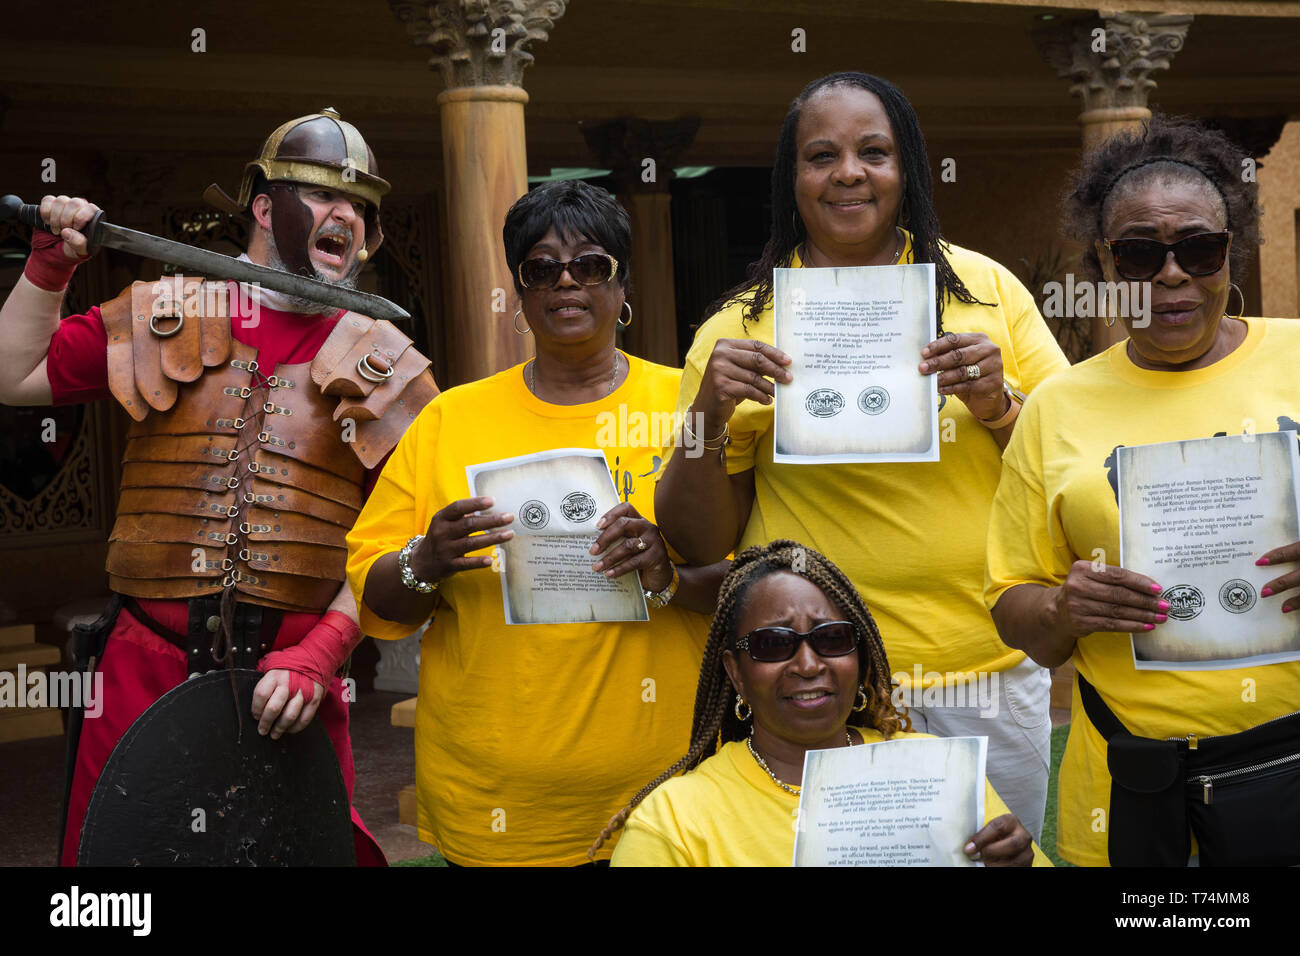 May 3, 2019 - Orlando, Florida, U.S - Women visiting from South Carolina pose for a group photo, holding certificates of completion, after participating in a Roman soldier training camp at The Holy Land Experience (HLE) in Orlando, Florida. The theme park, owned by the Trinity Broadcasting Network, recreates the architecture and themes of the ancient city of Jerusalem in 1st-century Judea. HLE is a non-denominational Christian living biblical museum and church. There are multiple religious-themed live performances given throughout the day in various locations, inside and out. (Credit Image: © Stock Photo